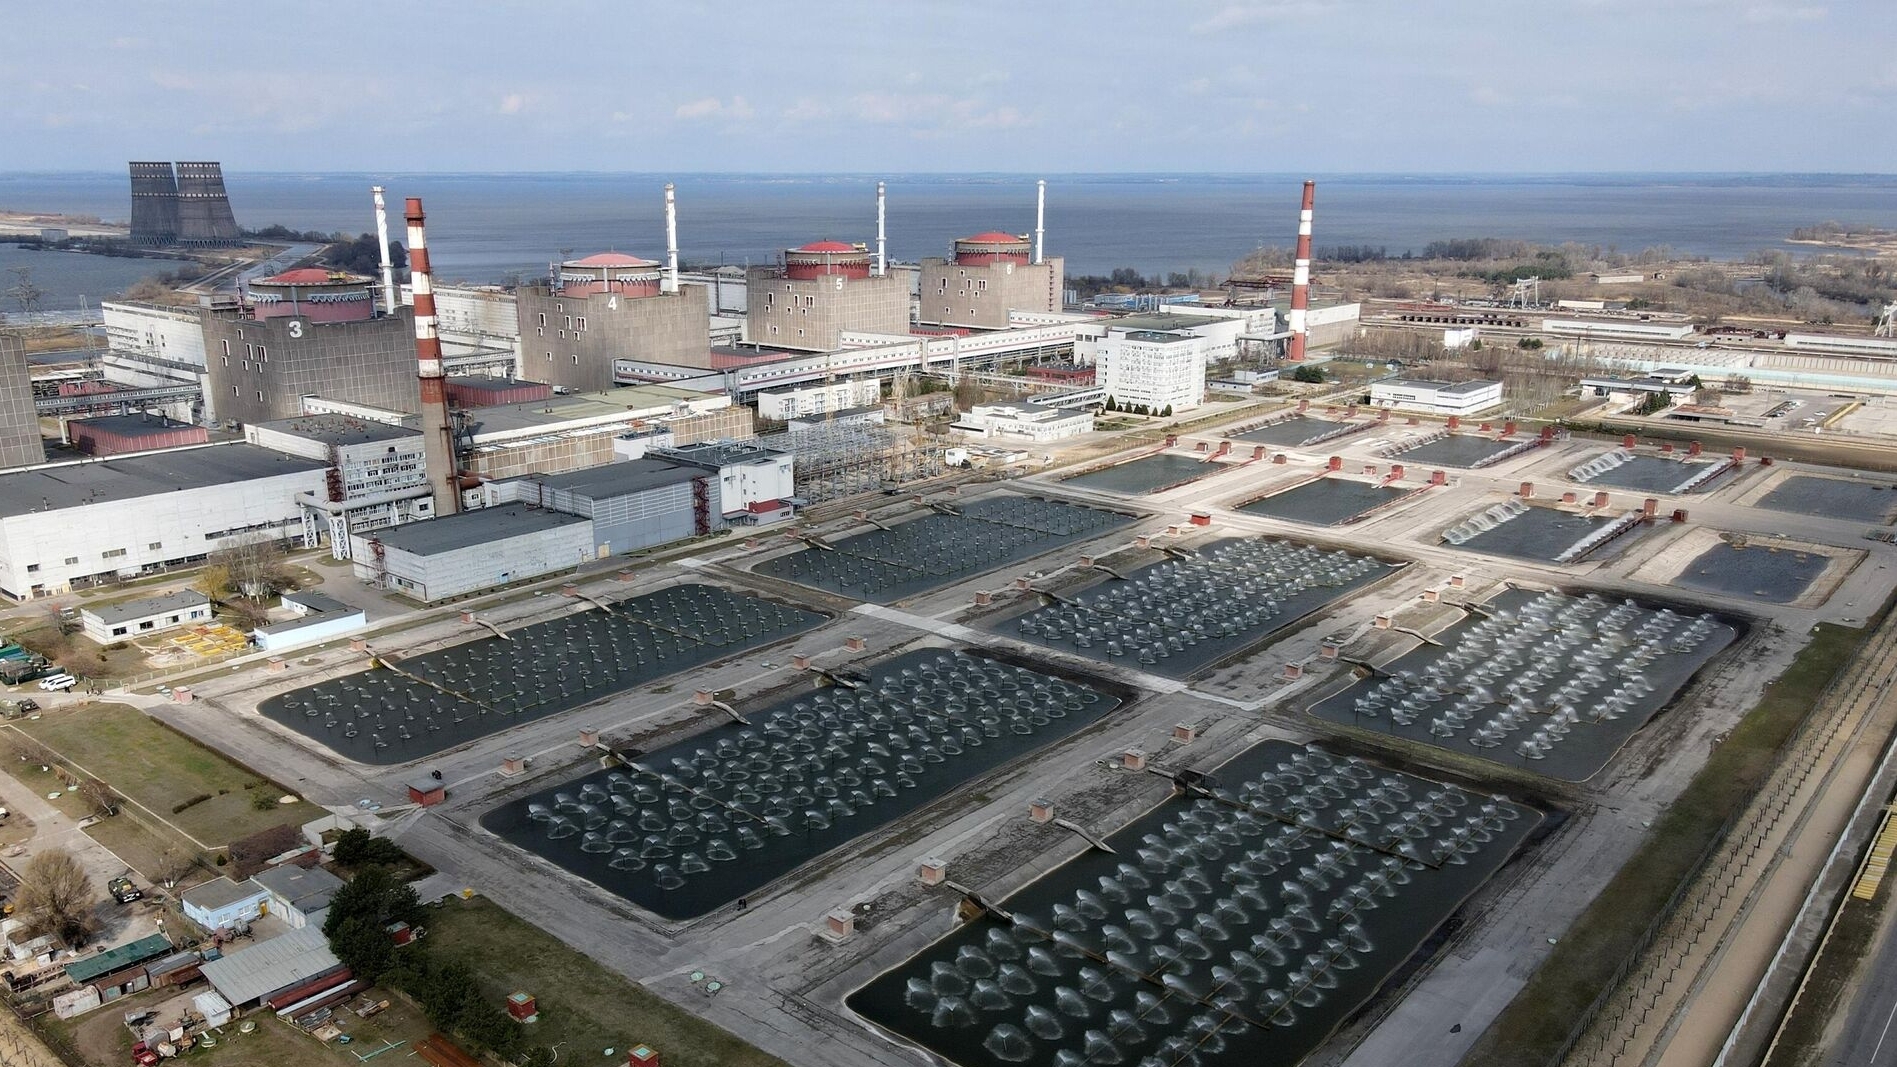 At the Zaporizhzhia NPP there is still a risk of hydrogen leakage and sputtering of radioactive substances